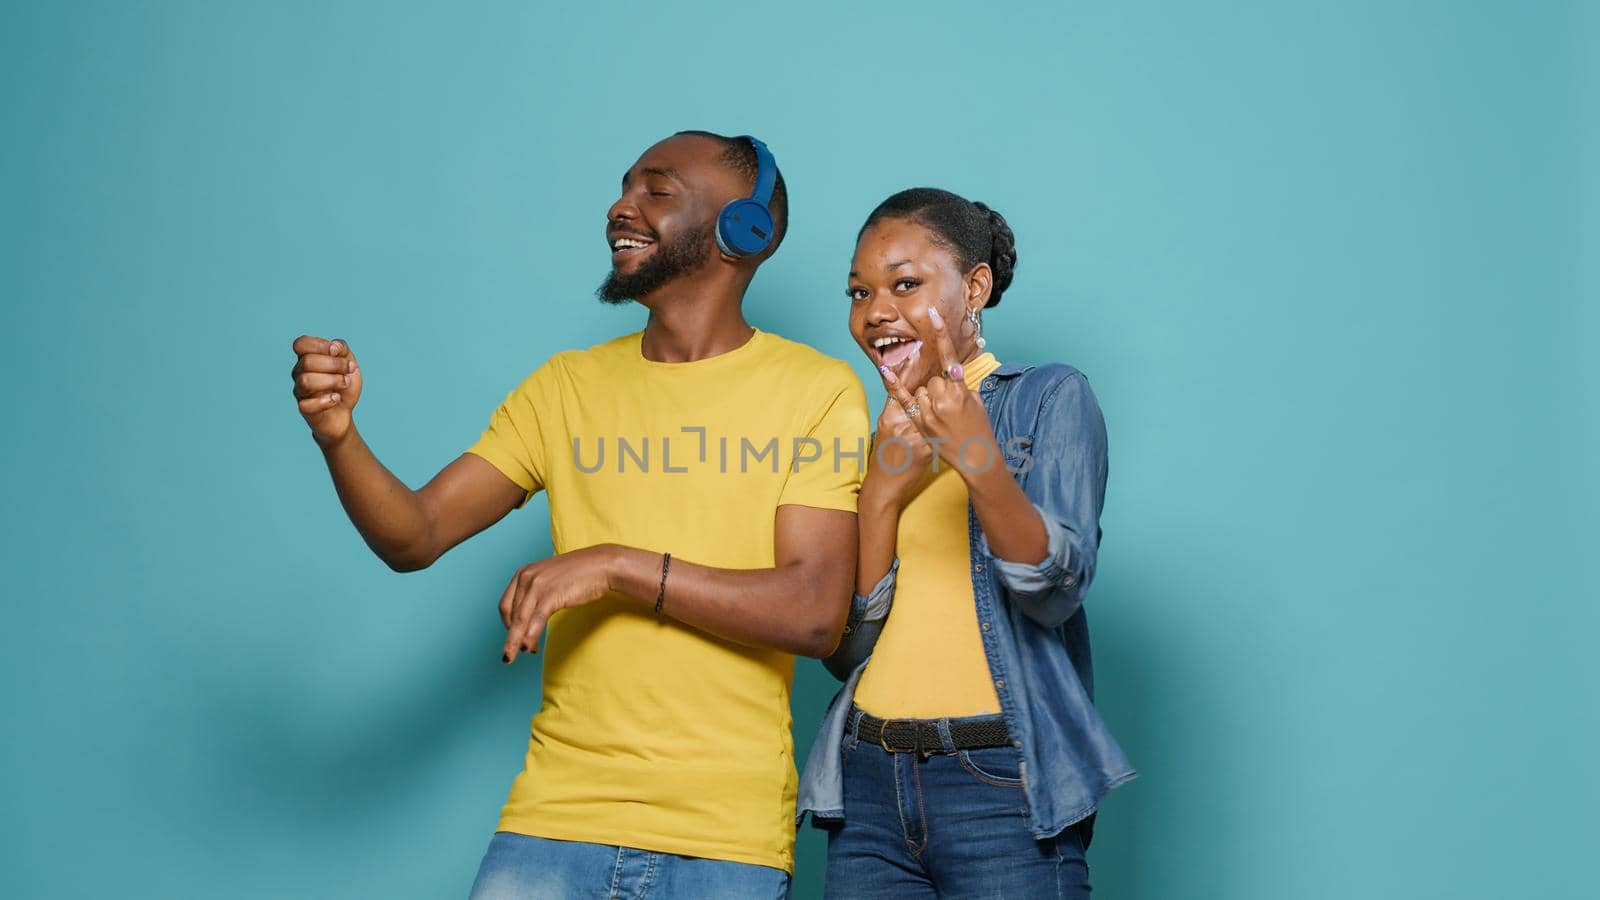 Man with headphones playing air guitar and woman showing rock sign by DCStudio